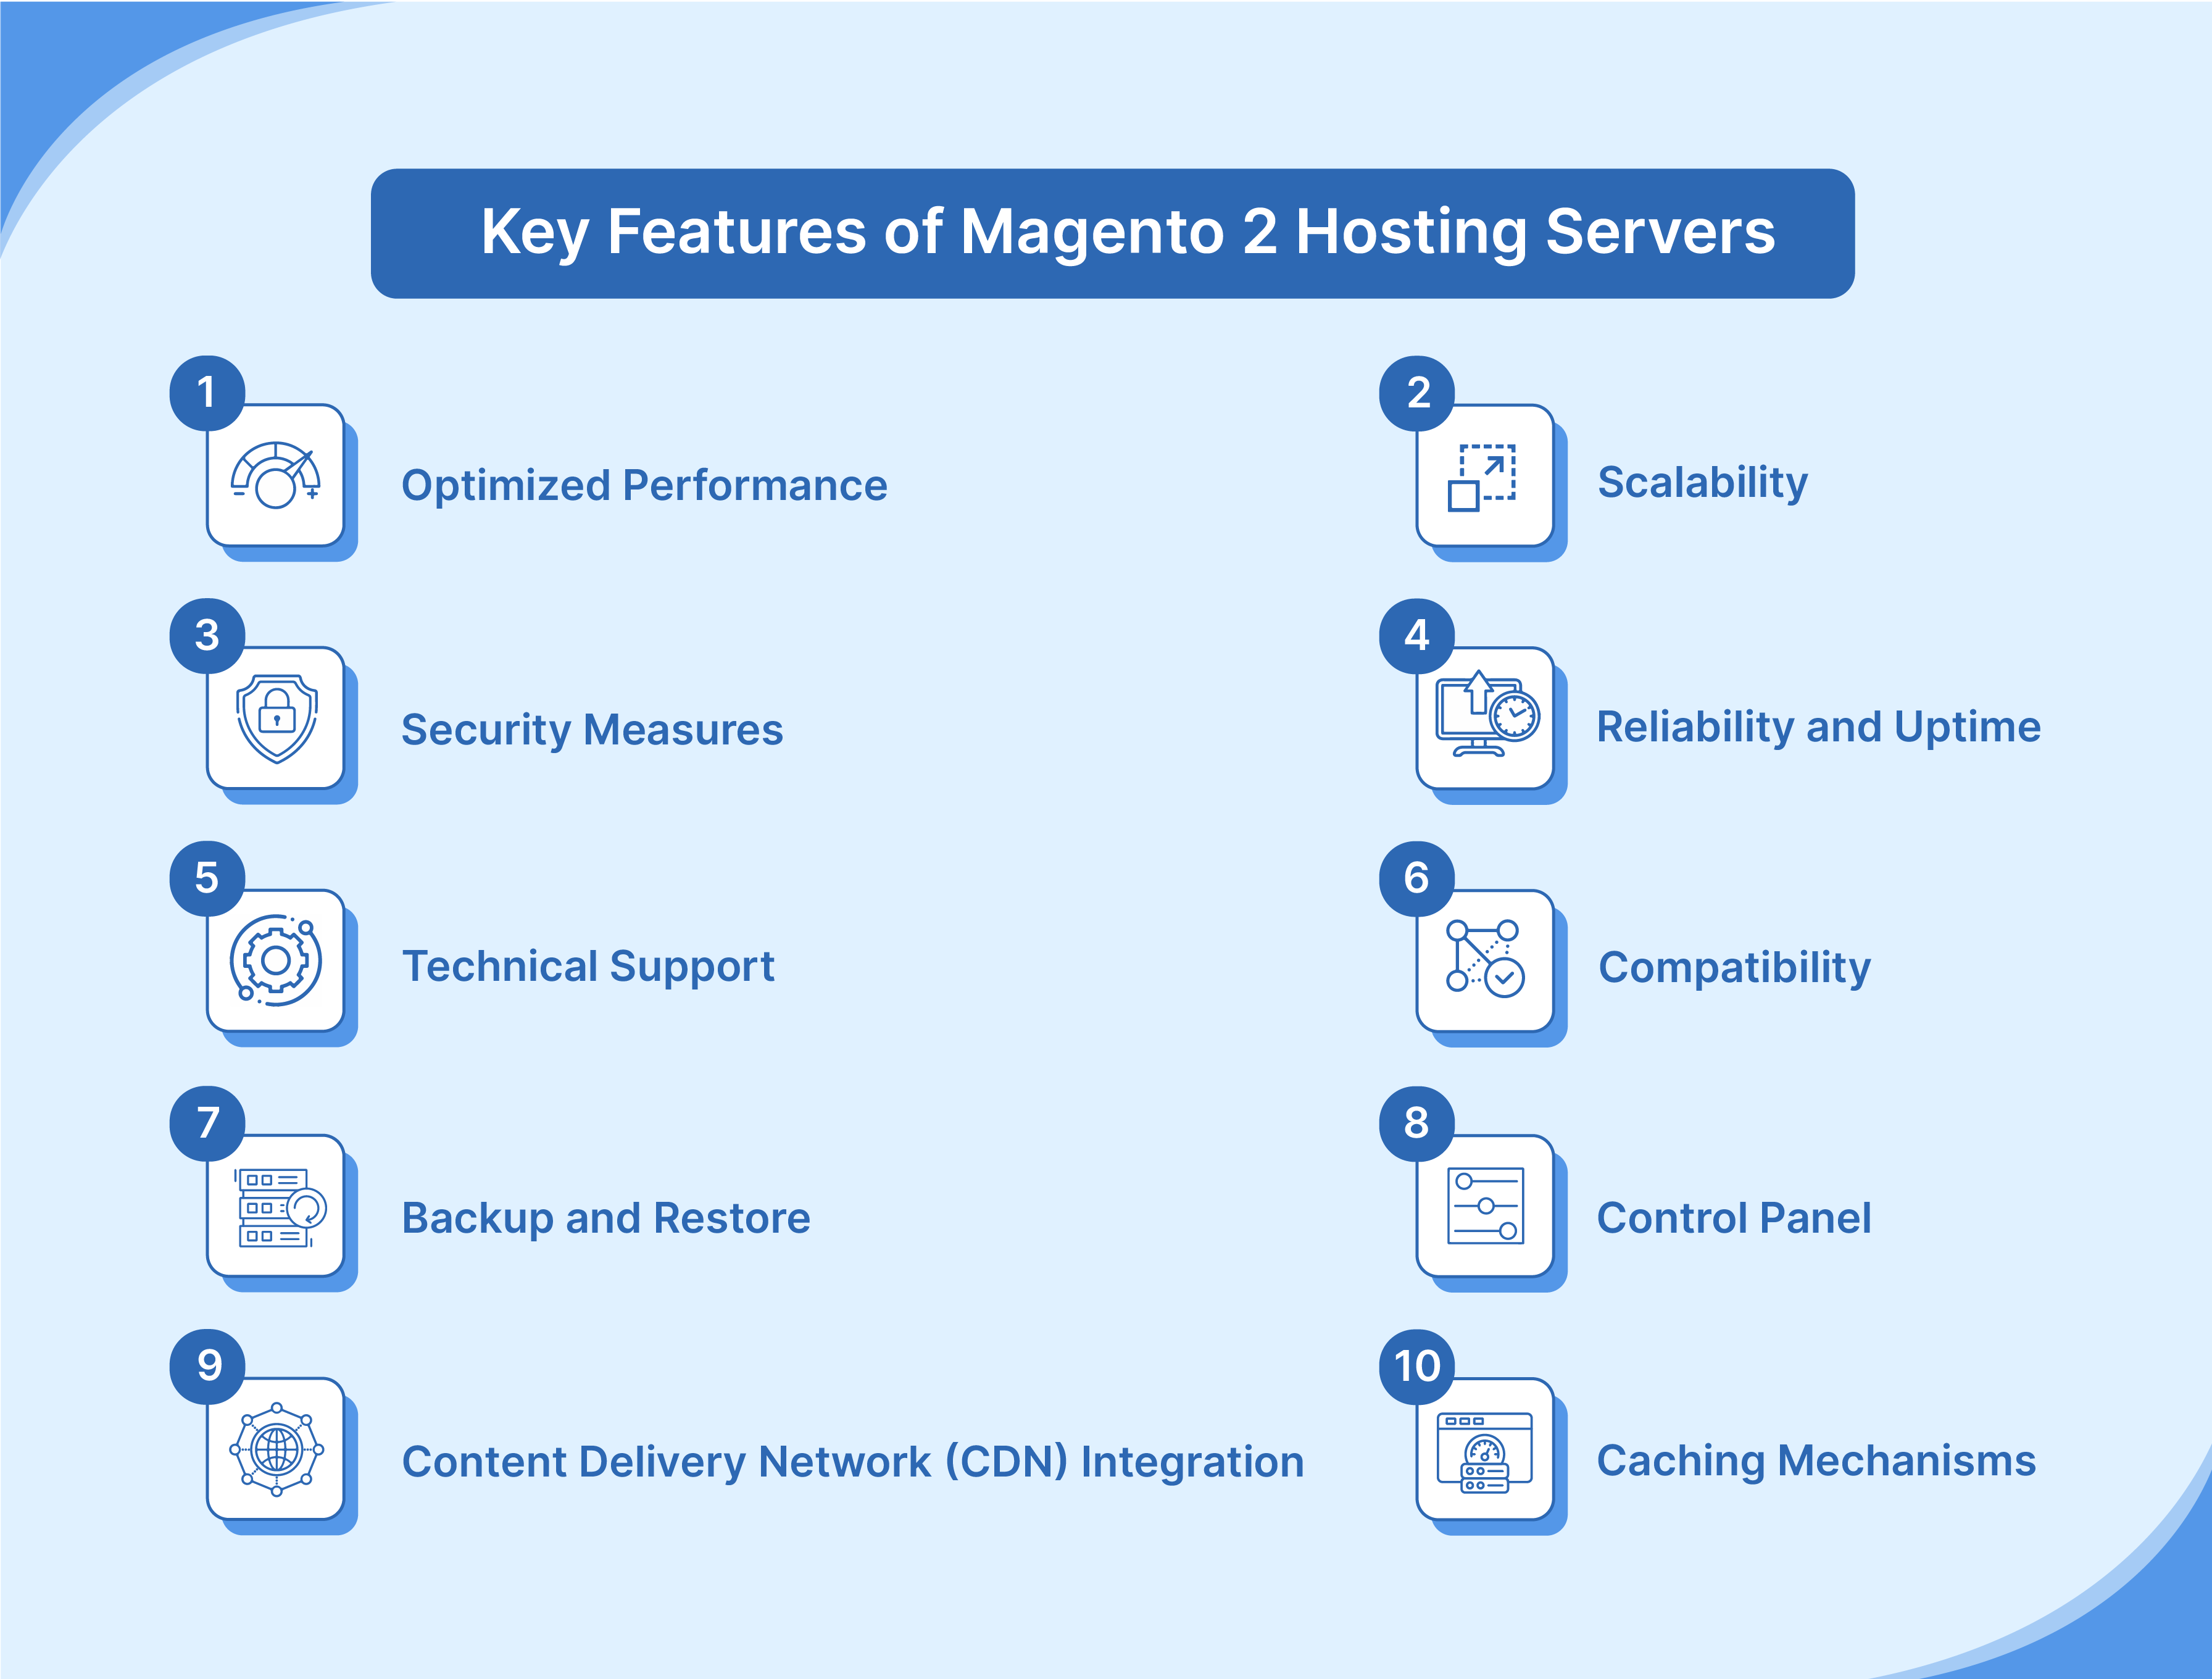 Key Features of Magento 2 Hosting Servers